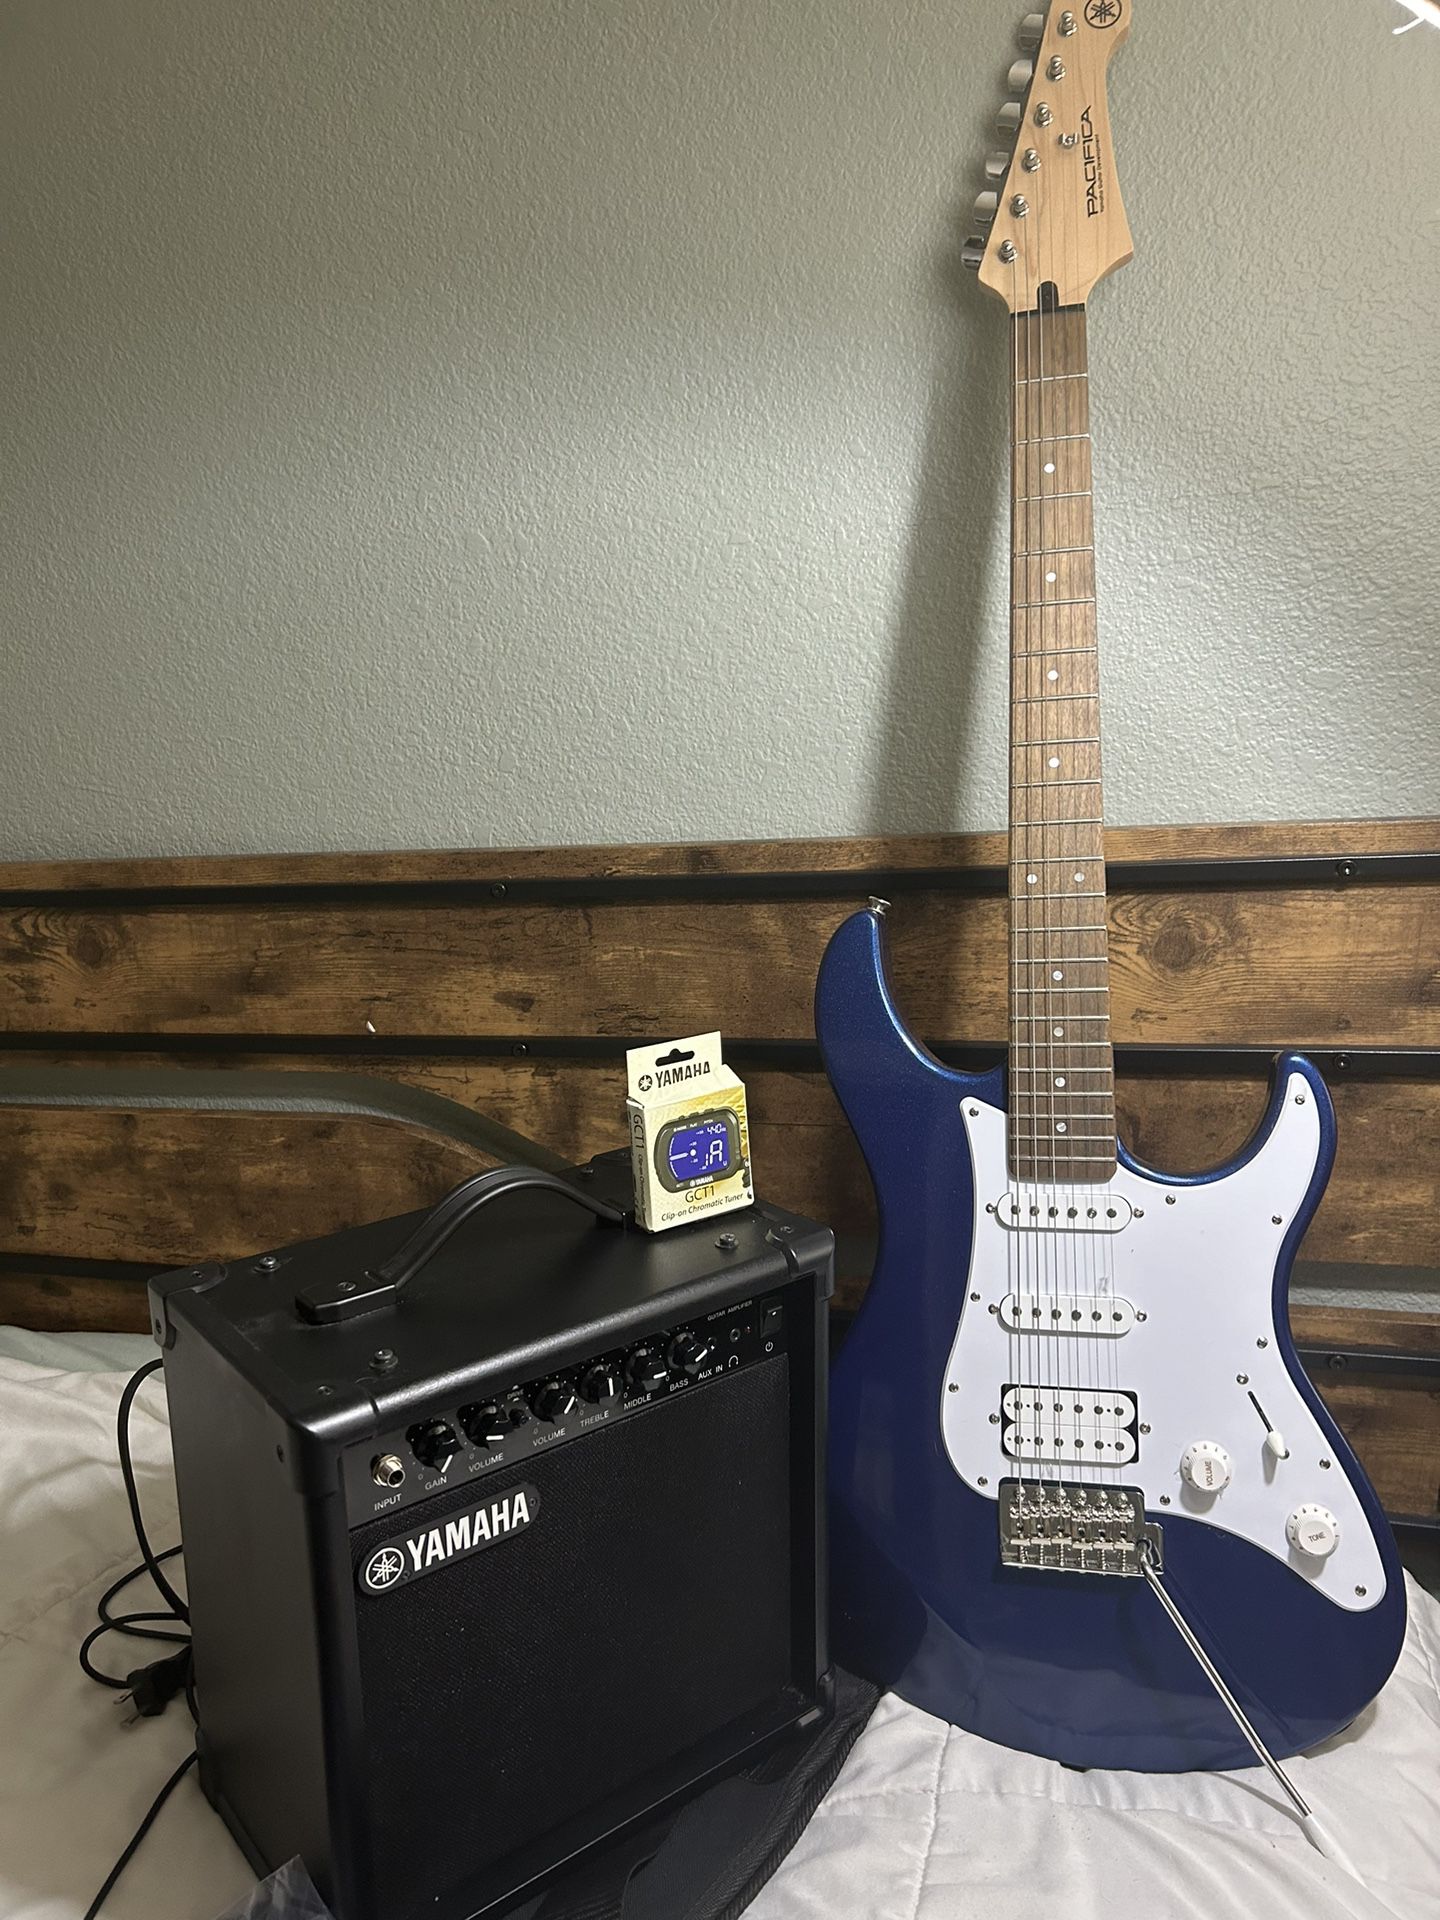 YAMAHA PACIFICA ELECTRIC GUITAR WITH AMPLIFIER